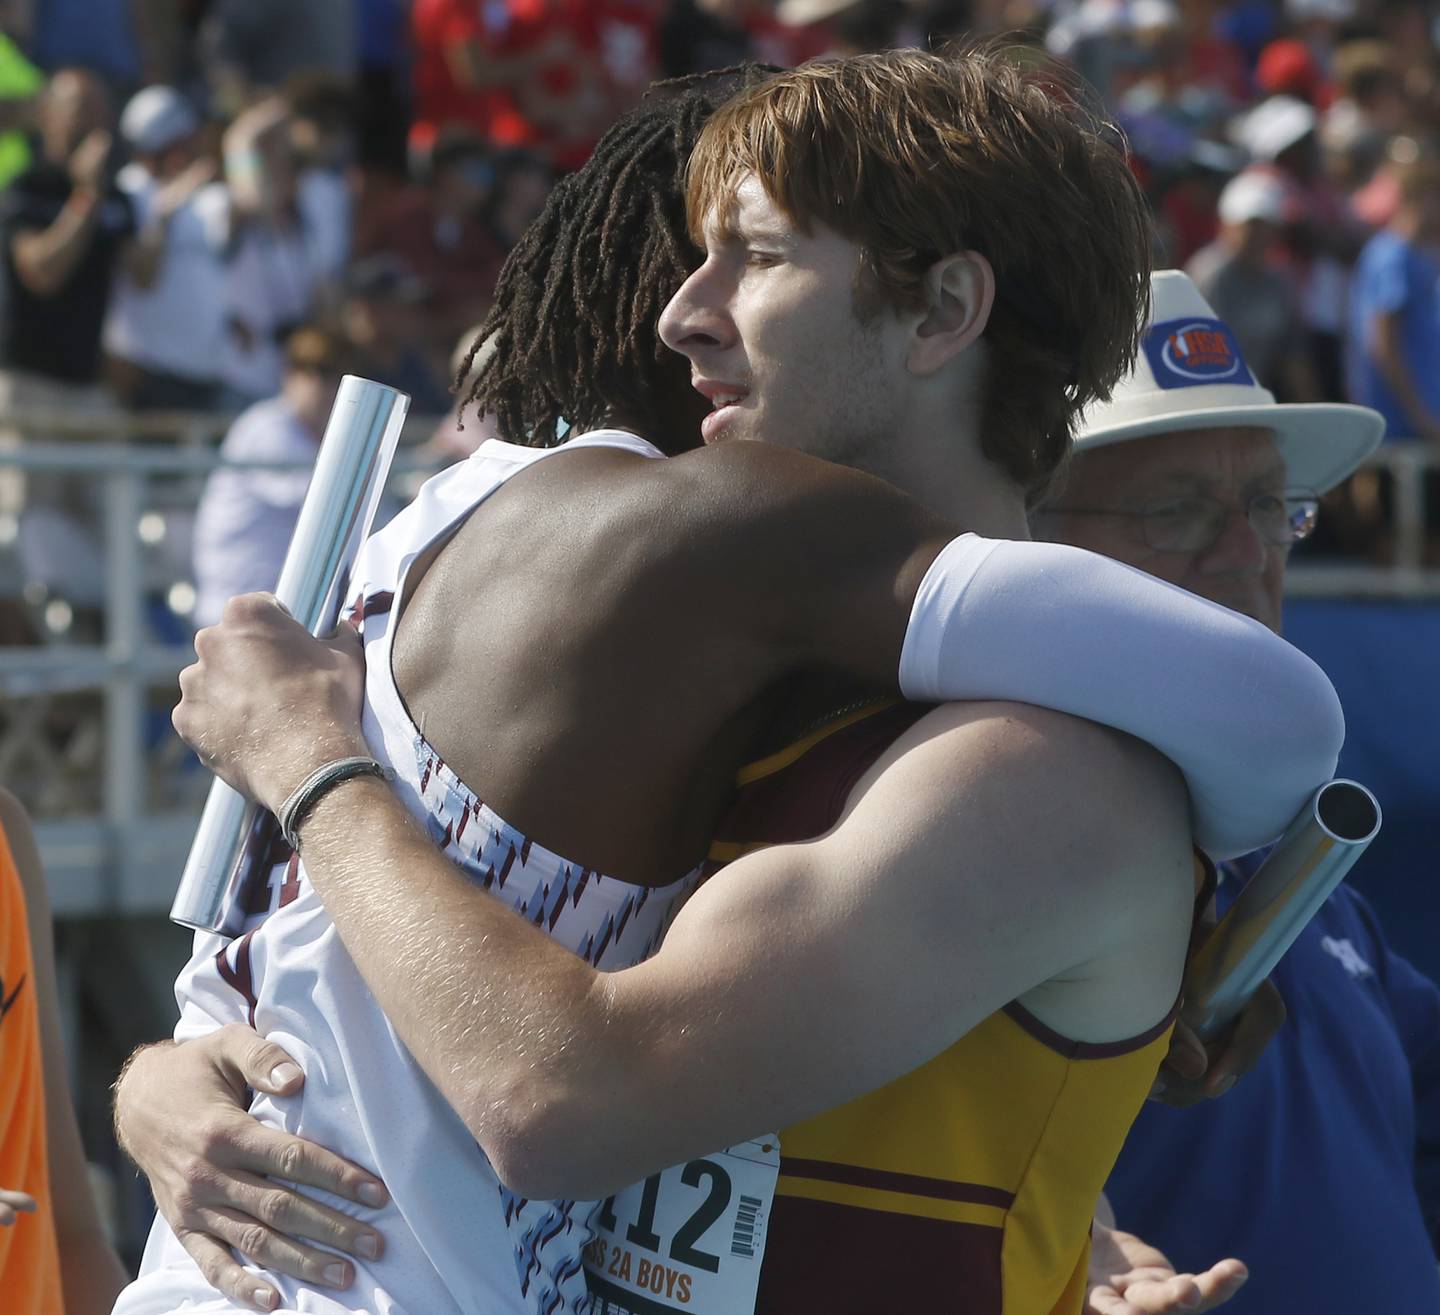 Kankakee’s Jyaire Hill and Richmond-Burton’s Jack Verdoni hug after finishing the 4 x 400 meter relay during the IHSA Class1A State Track and Field Championships Saturday, May 28, 2022, at Eastern Illinois University in Charleston.